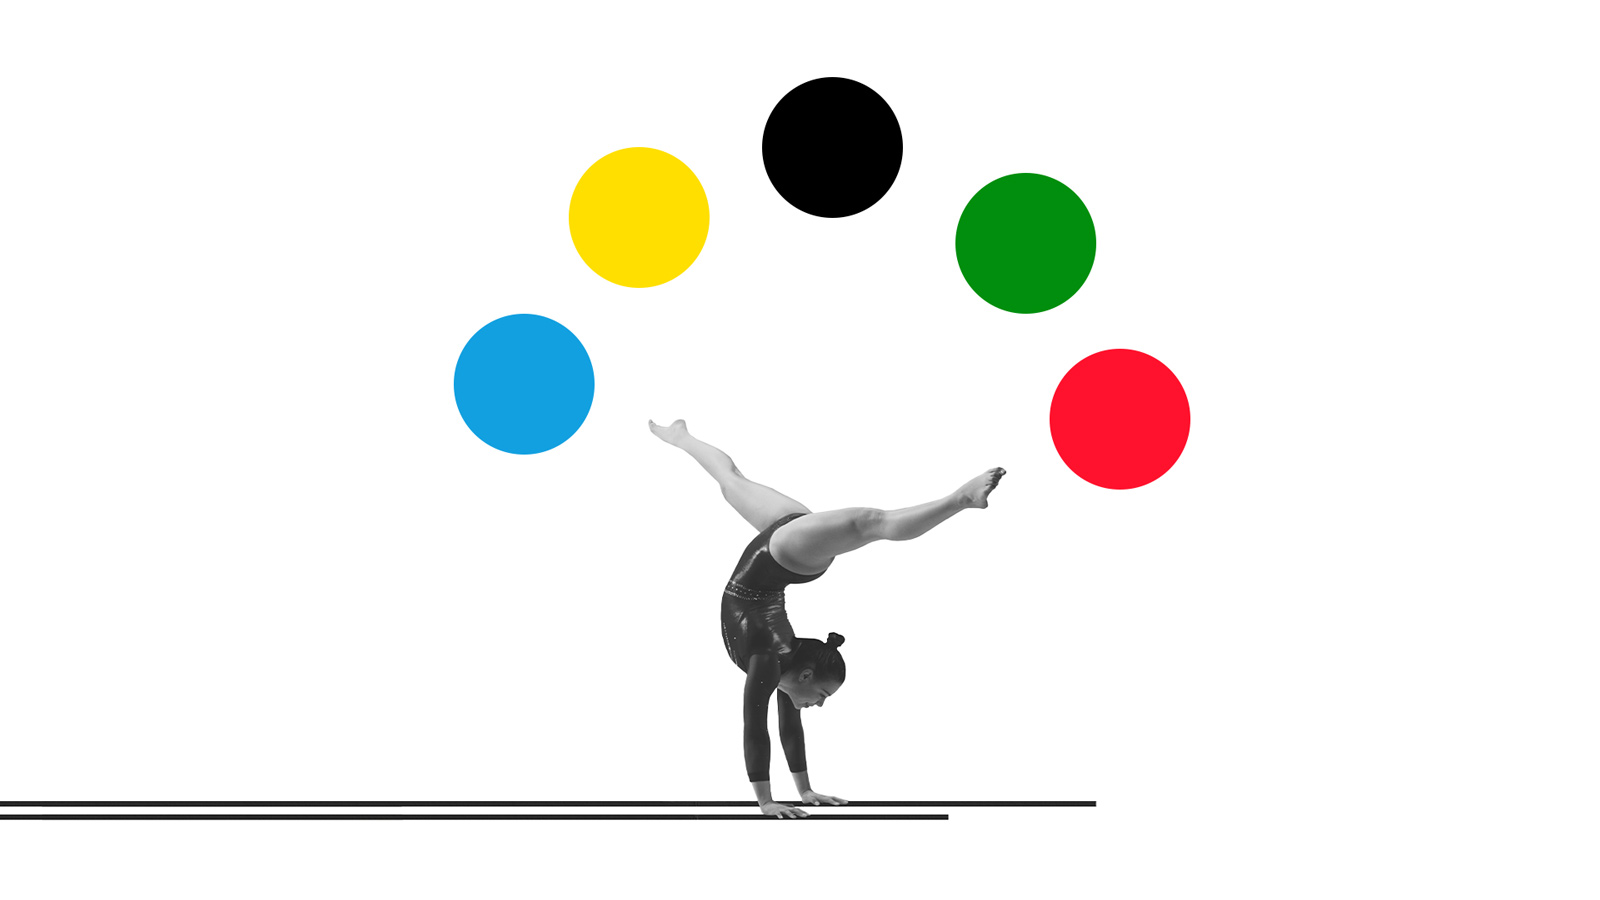 Female gymnast forming an arc of the Olympic colors